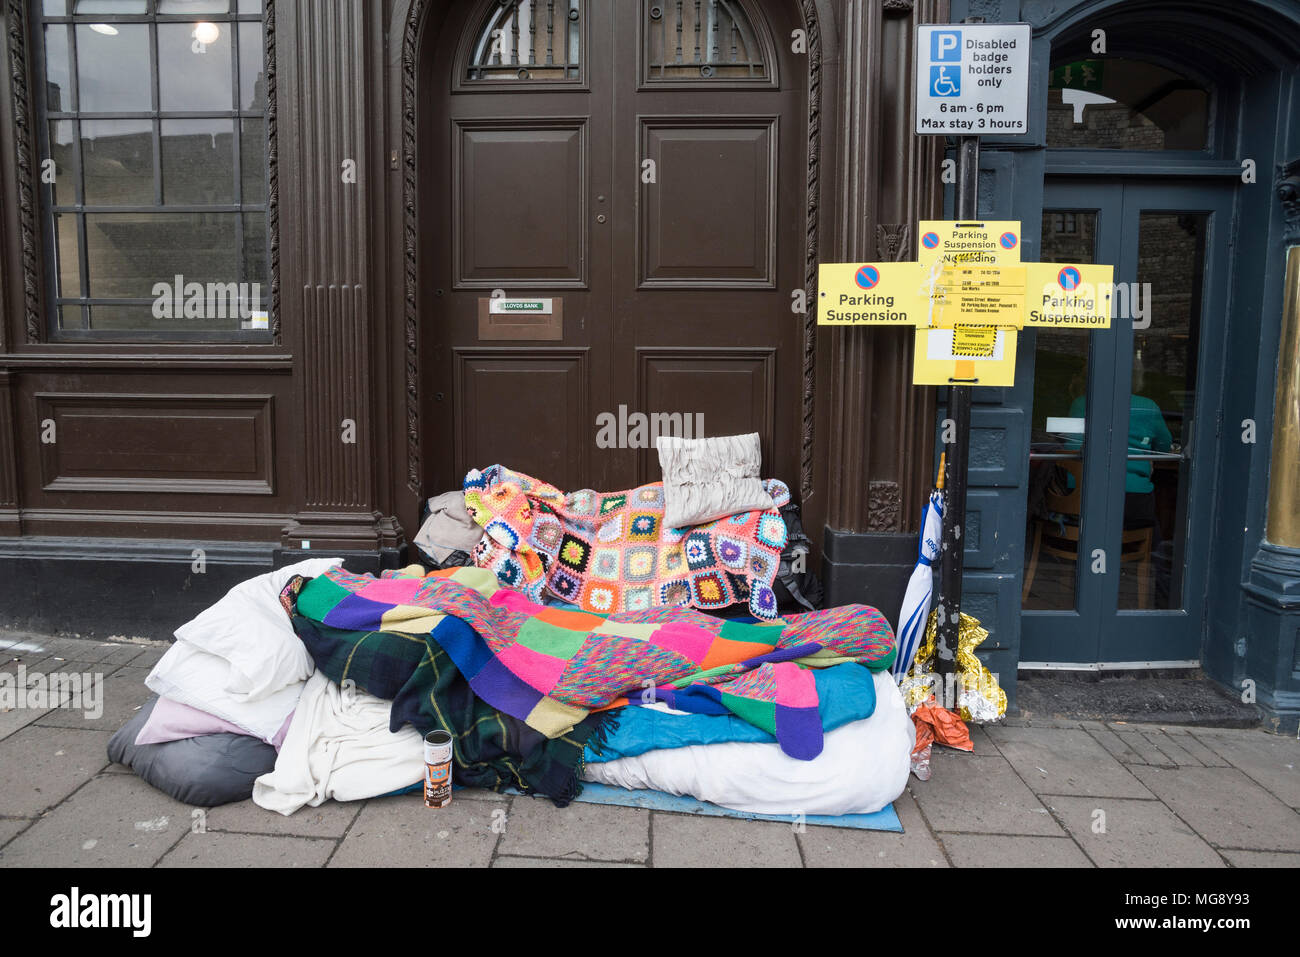 Bedding of a rough sleeper, just opposite Windsor Castle, Windsor, UK. The reflection of the Castle is visible in the window on the left. Stock Photo